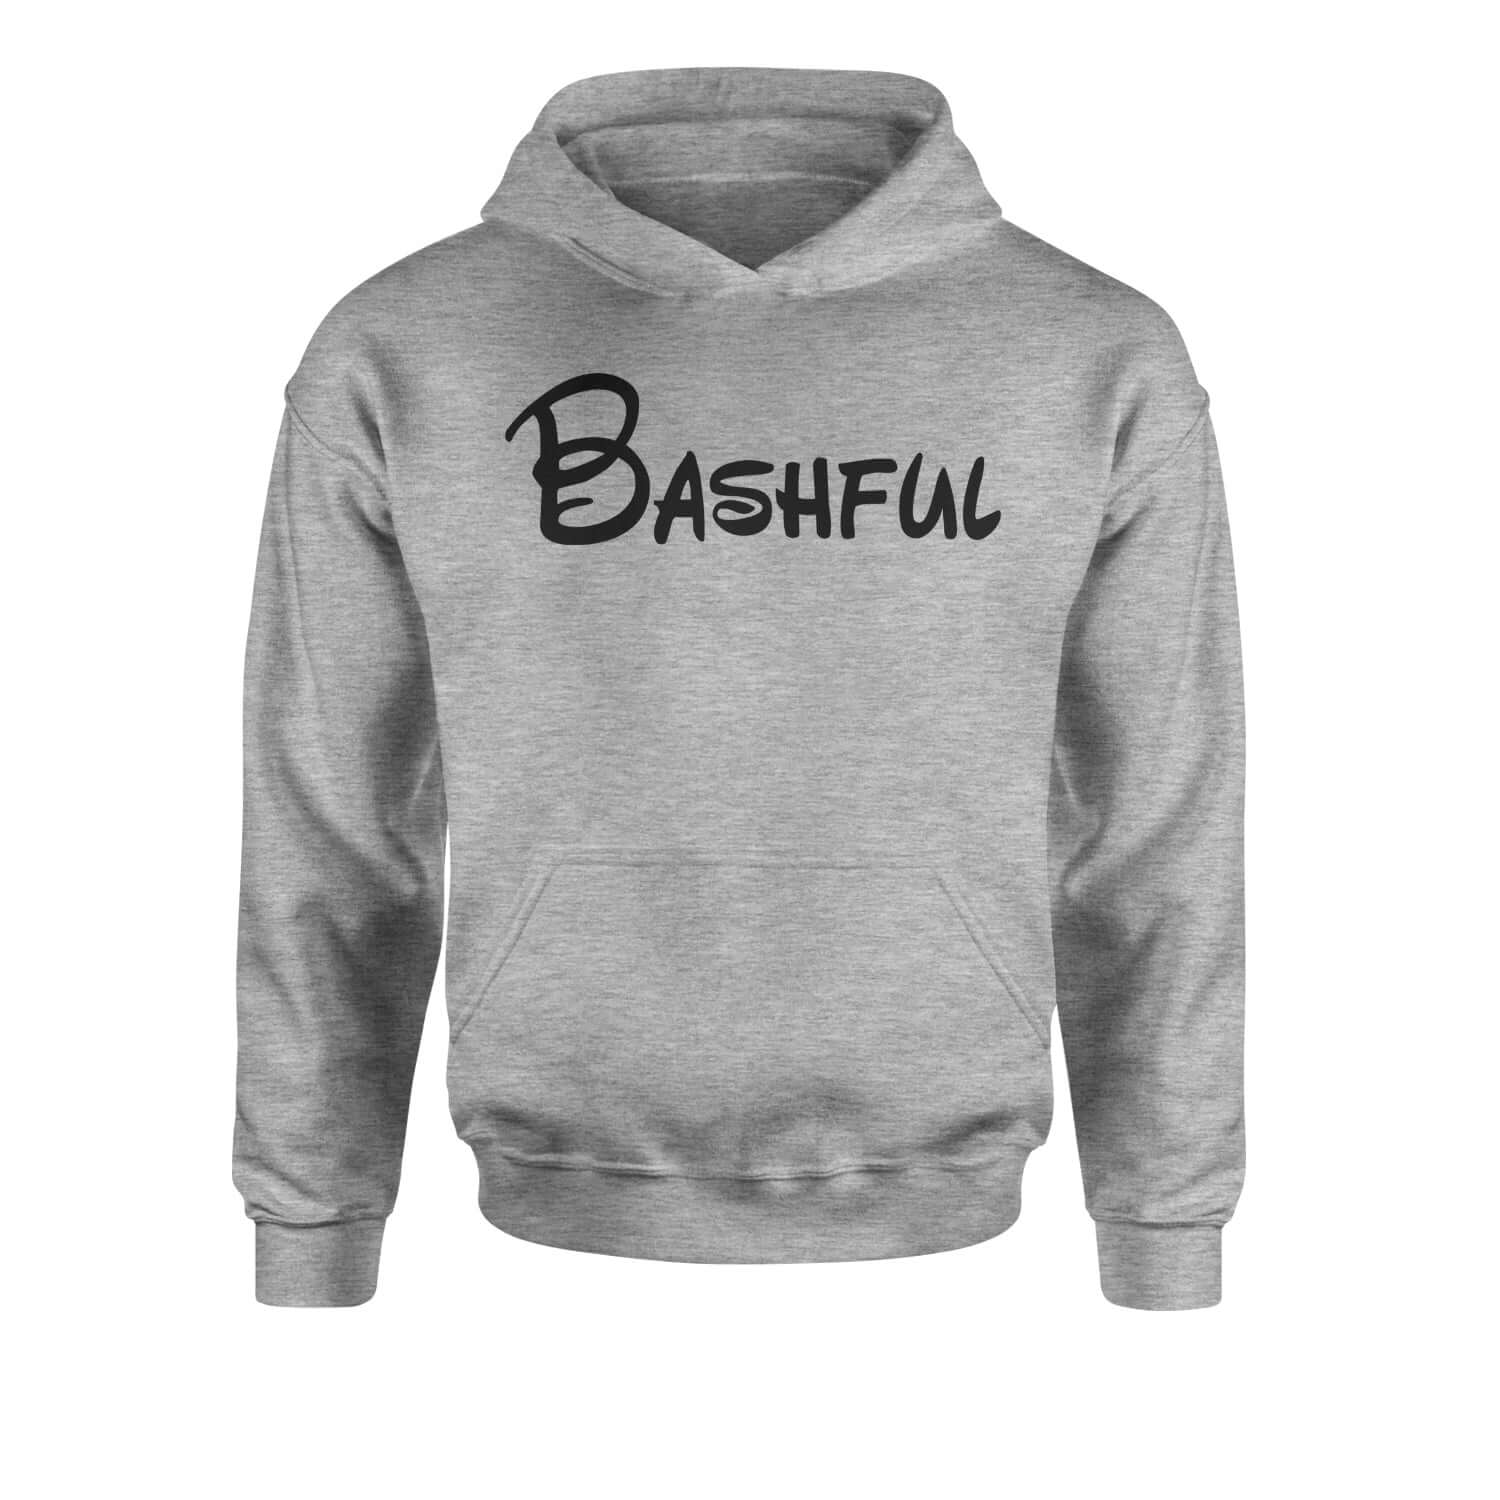 Bashful - 7 Dwarfs Costume Youth-Sized Hoodie and, costume, dwarfs, group, halloween, matching, seven, snow, the, white by Expression Tees